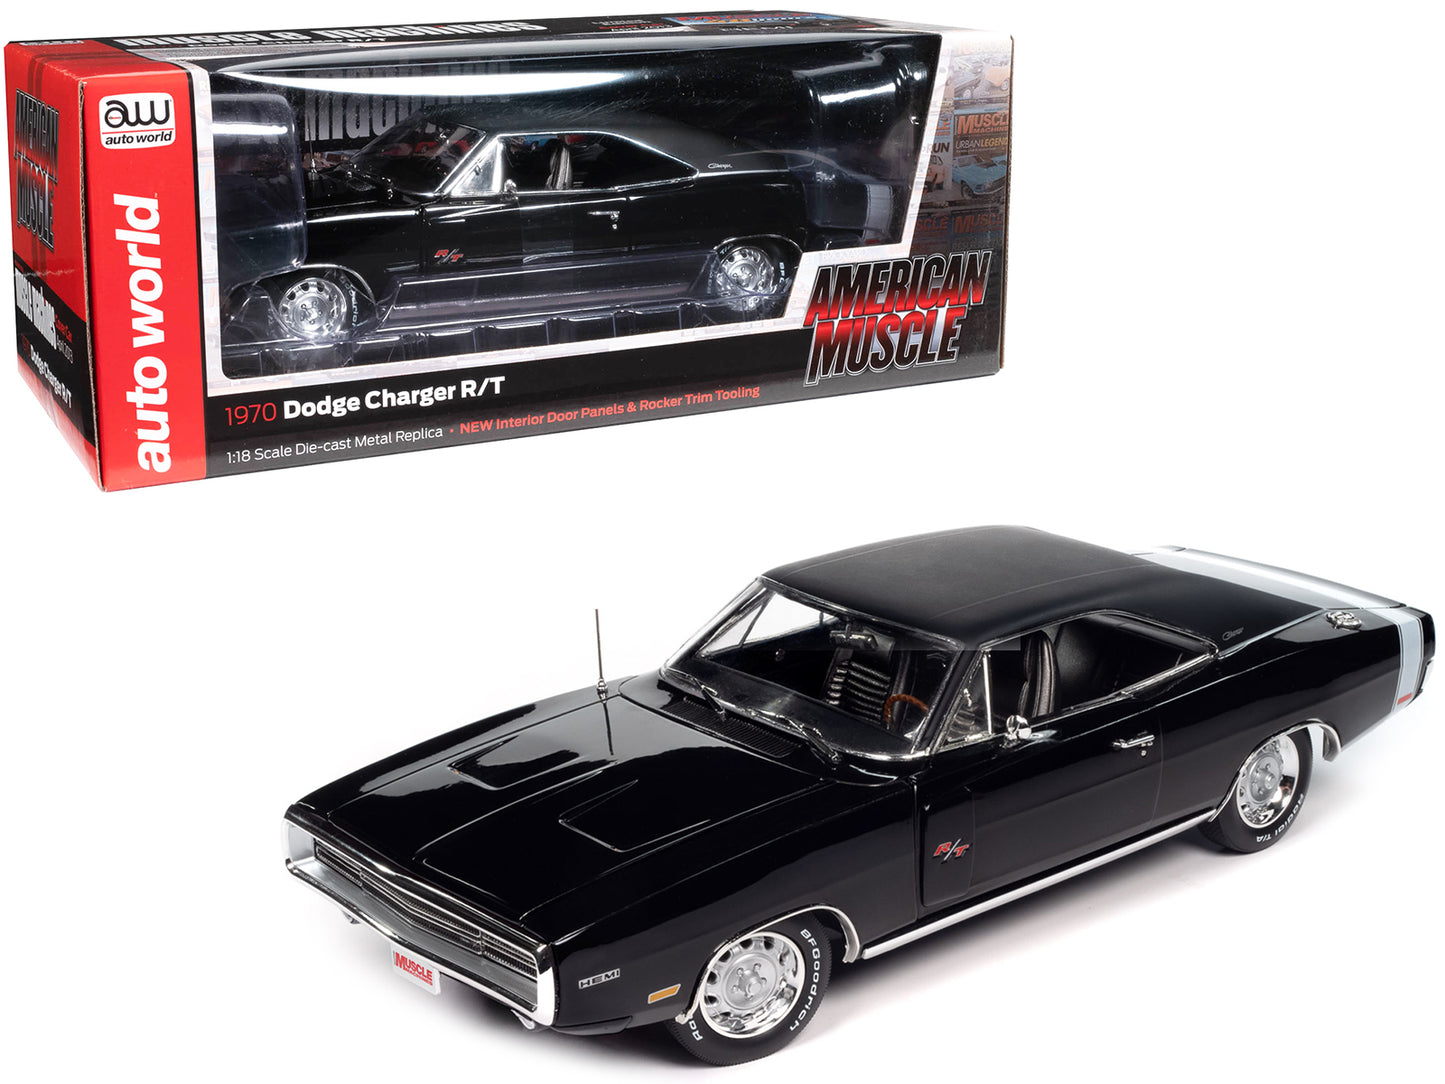 1970 Dodge Charger R/T Black with White Tail Stripe "Hemmings Muscle Machines Magazine Cover Car" (April 2013) "American Muscle" Series 1/18 Diecast Model Car by Auto World